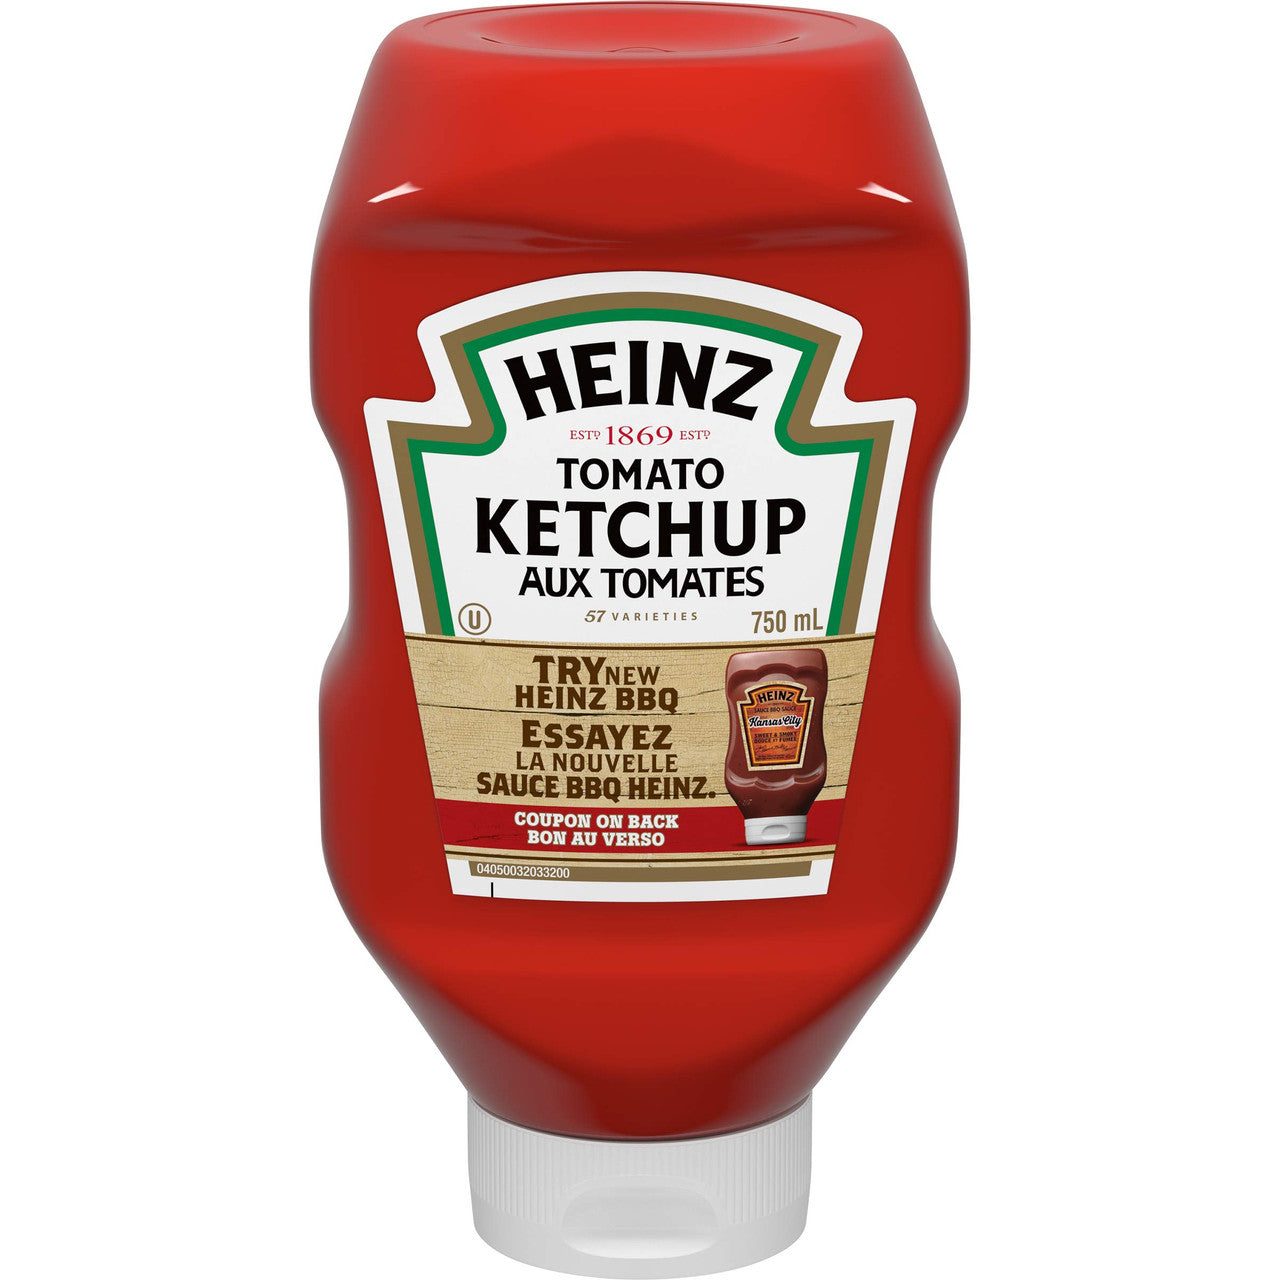 Heinz Tomato Ketchup, Twin Pack (Pack of 32)